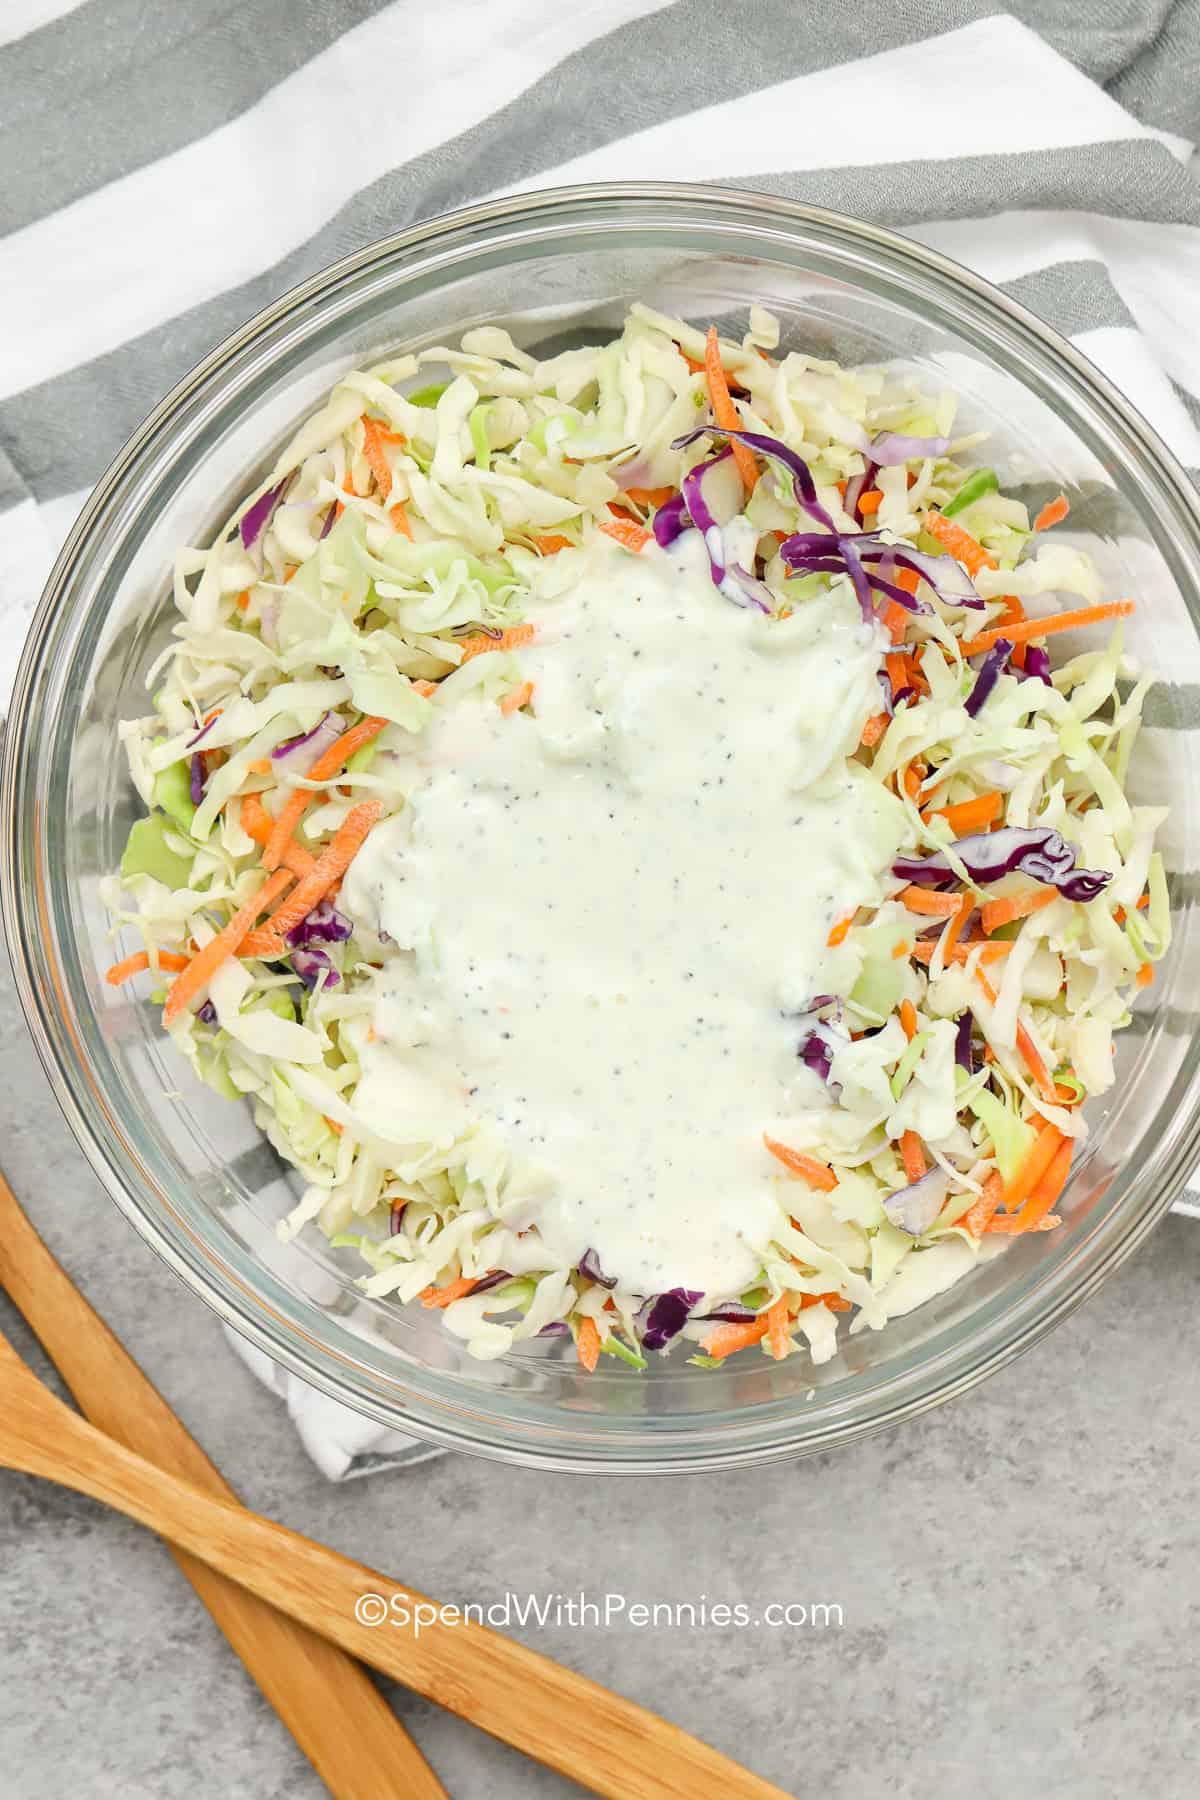 Overhead shot of Coleslaw with coleslaw dressing on top ready to mix